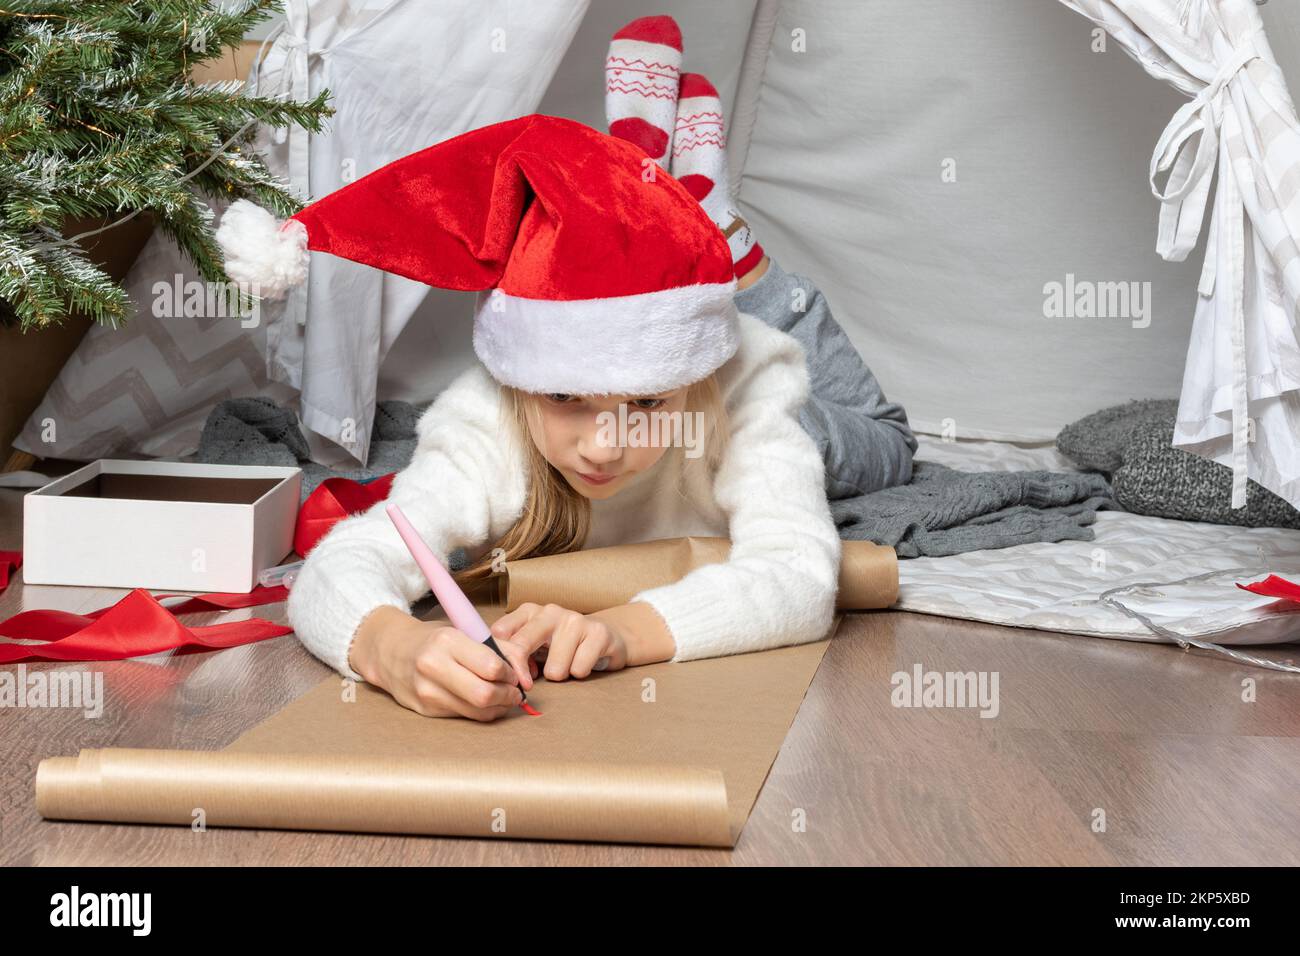 Christmas miracle wish list. Smiling girl in Santa Claus hat and a white sweater writing letter dreams for gifts to Santa Claus. The child hopes for a Stock Photo